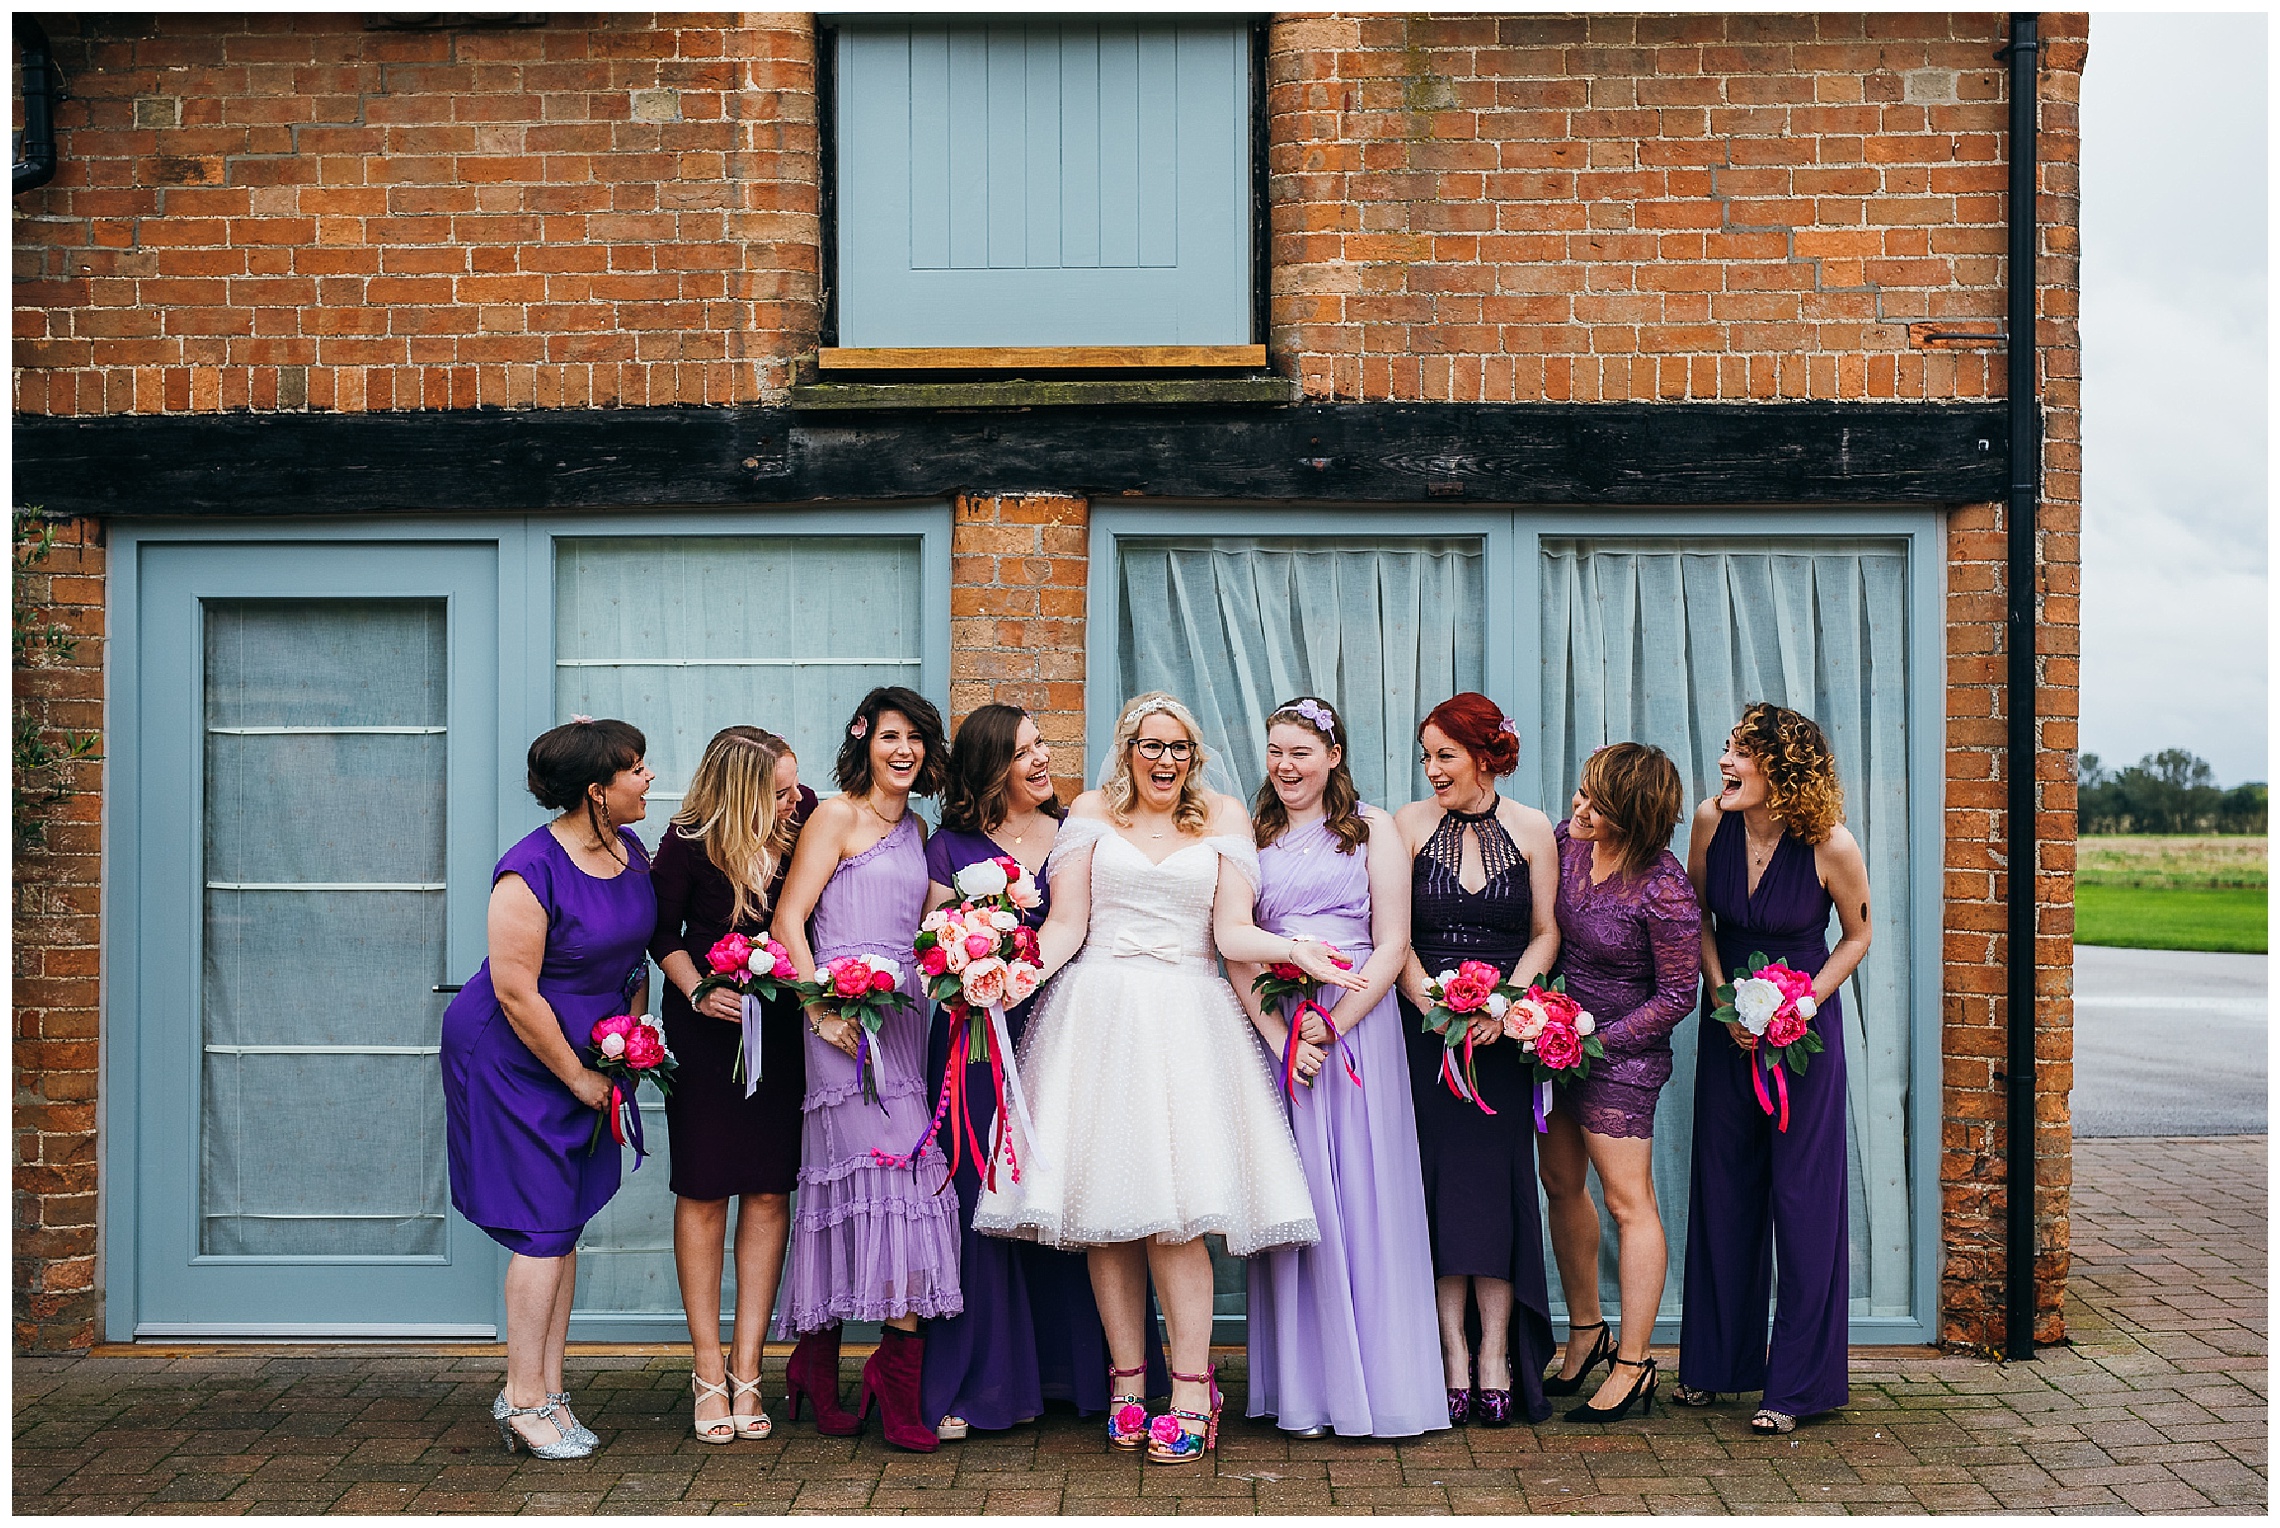 Bride in Mooshki dress and bridesmaids in different shades of purple dresses with pink flowers